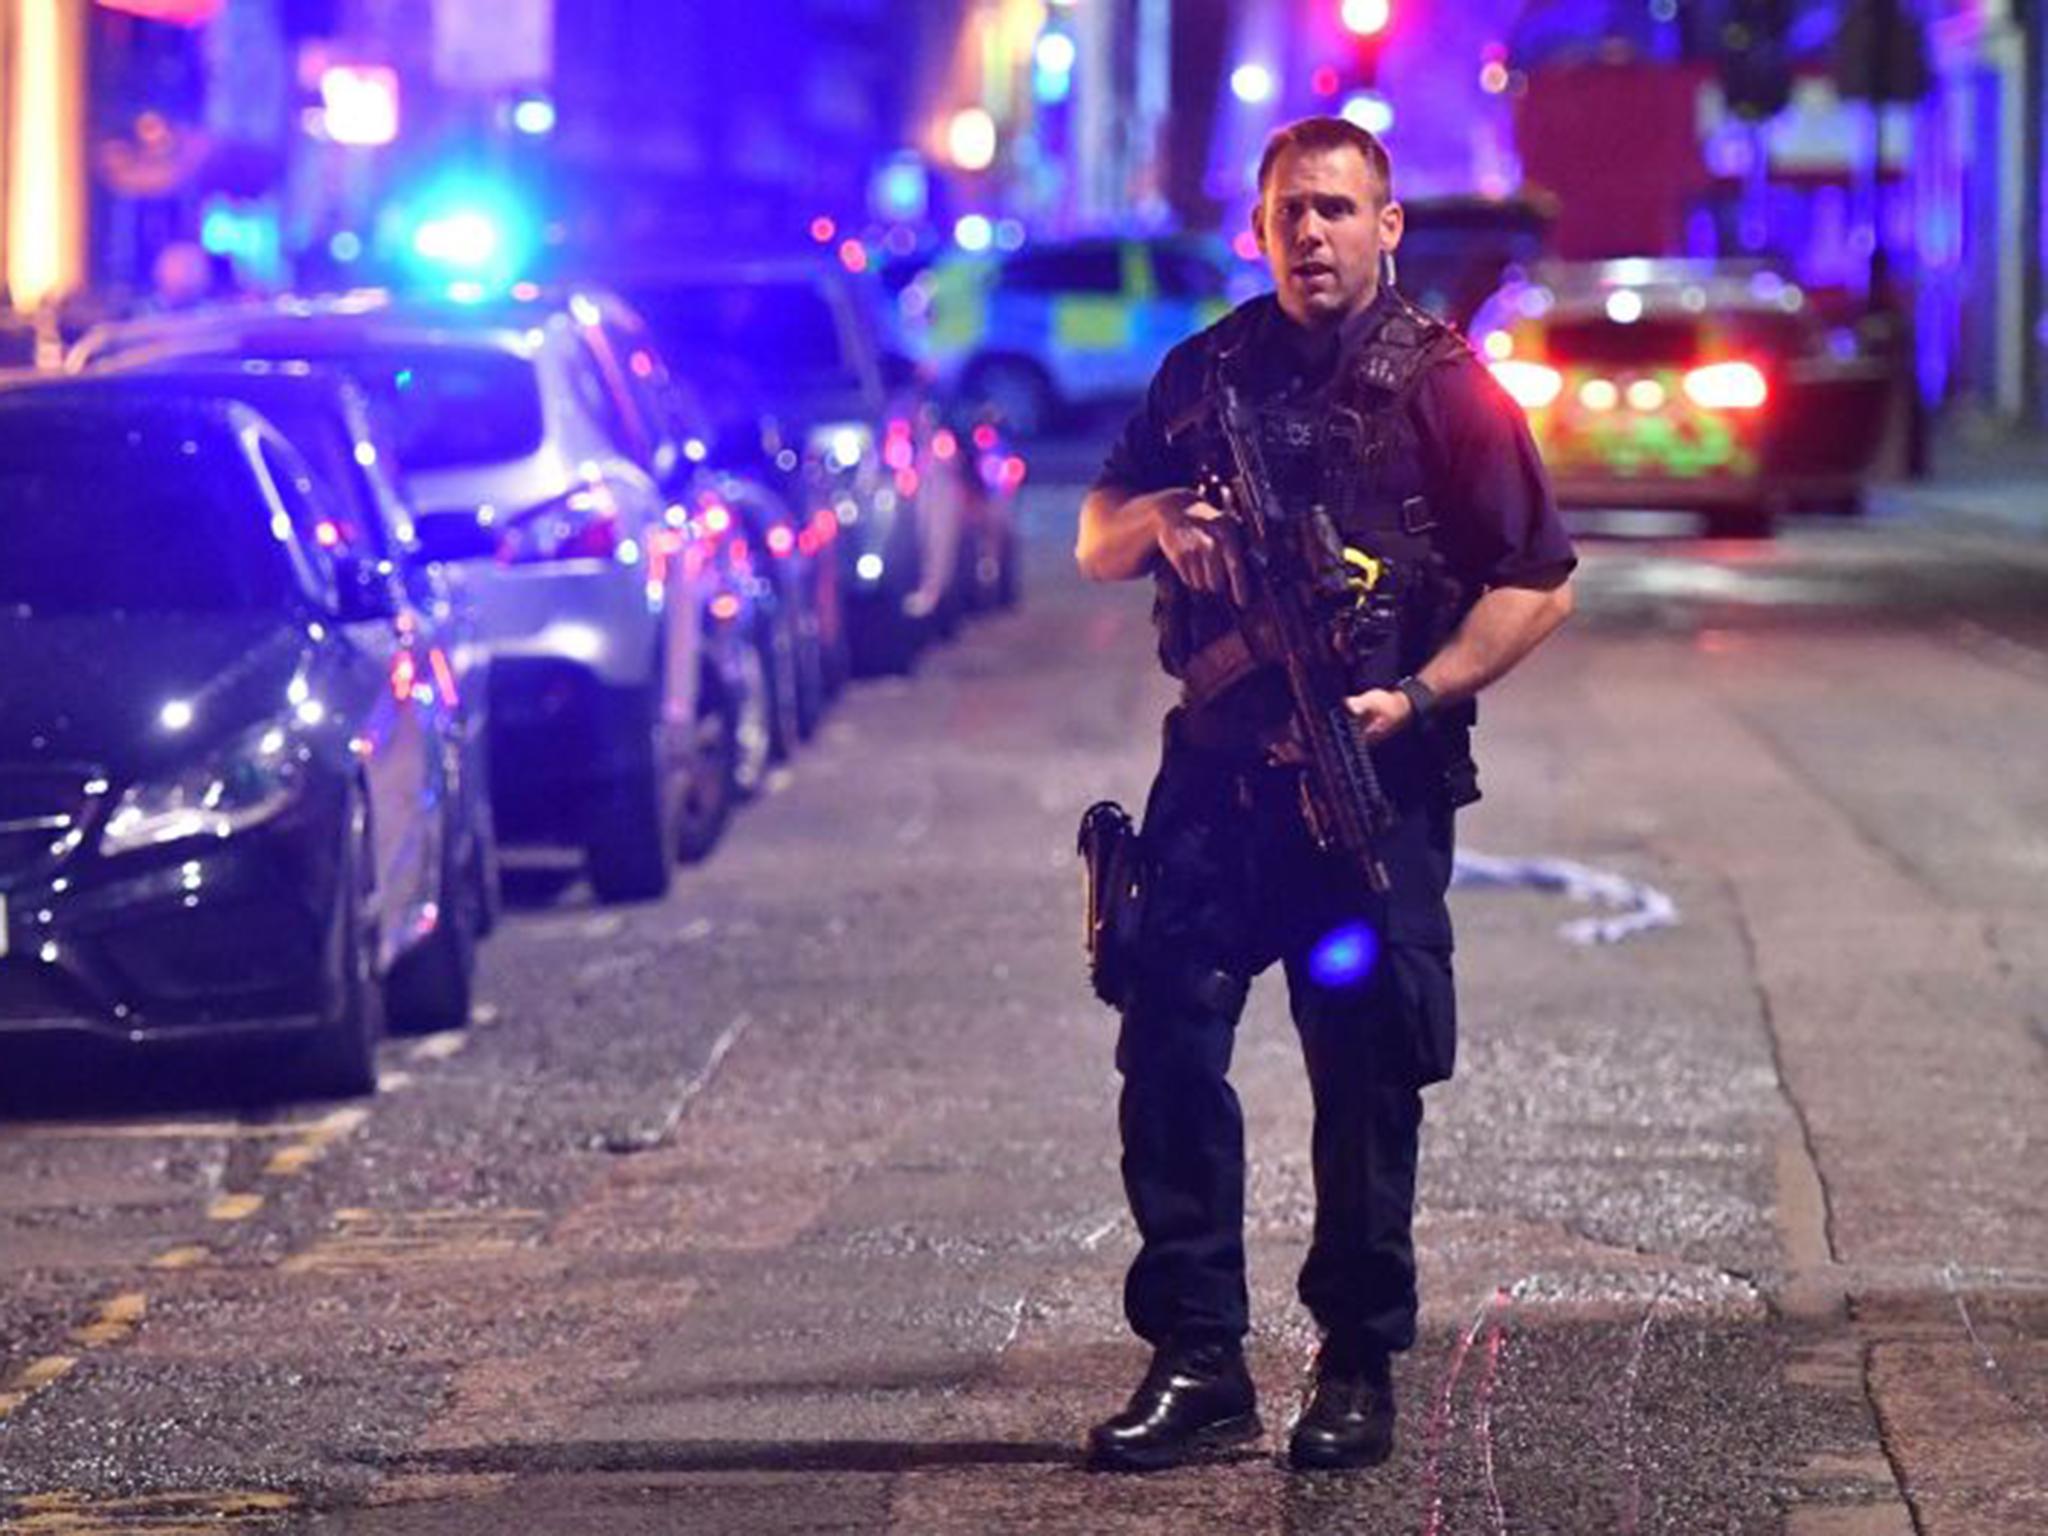 Armed police on Borough High Street on the night of the incident